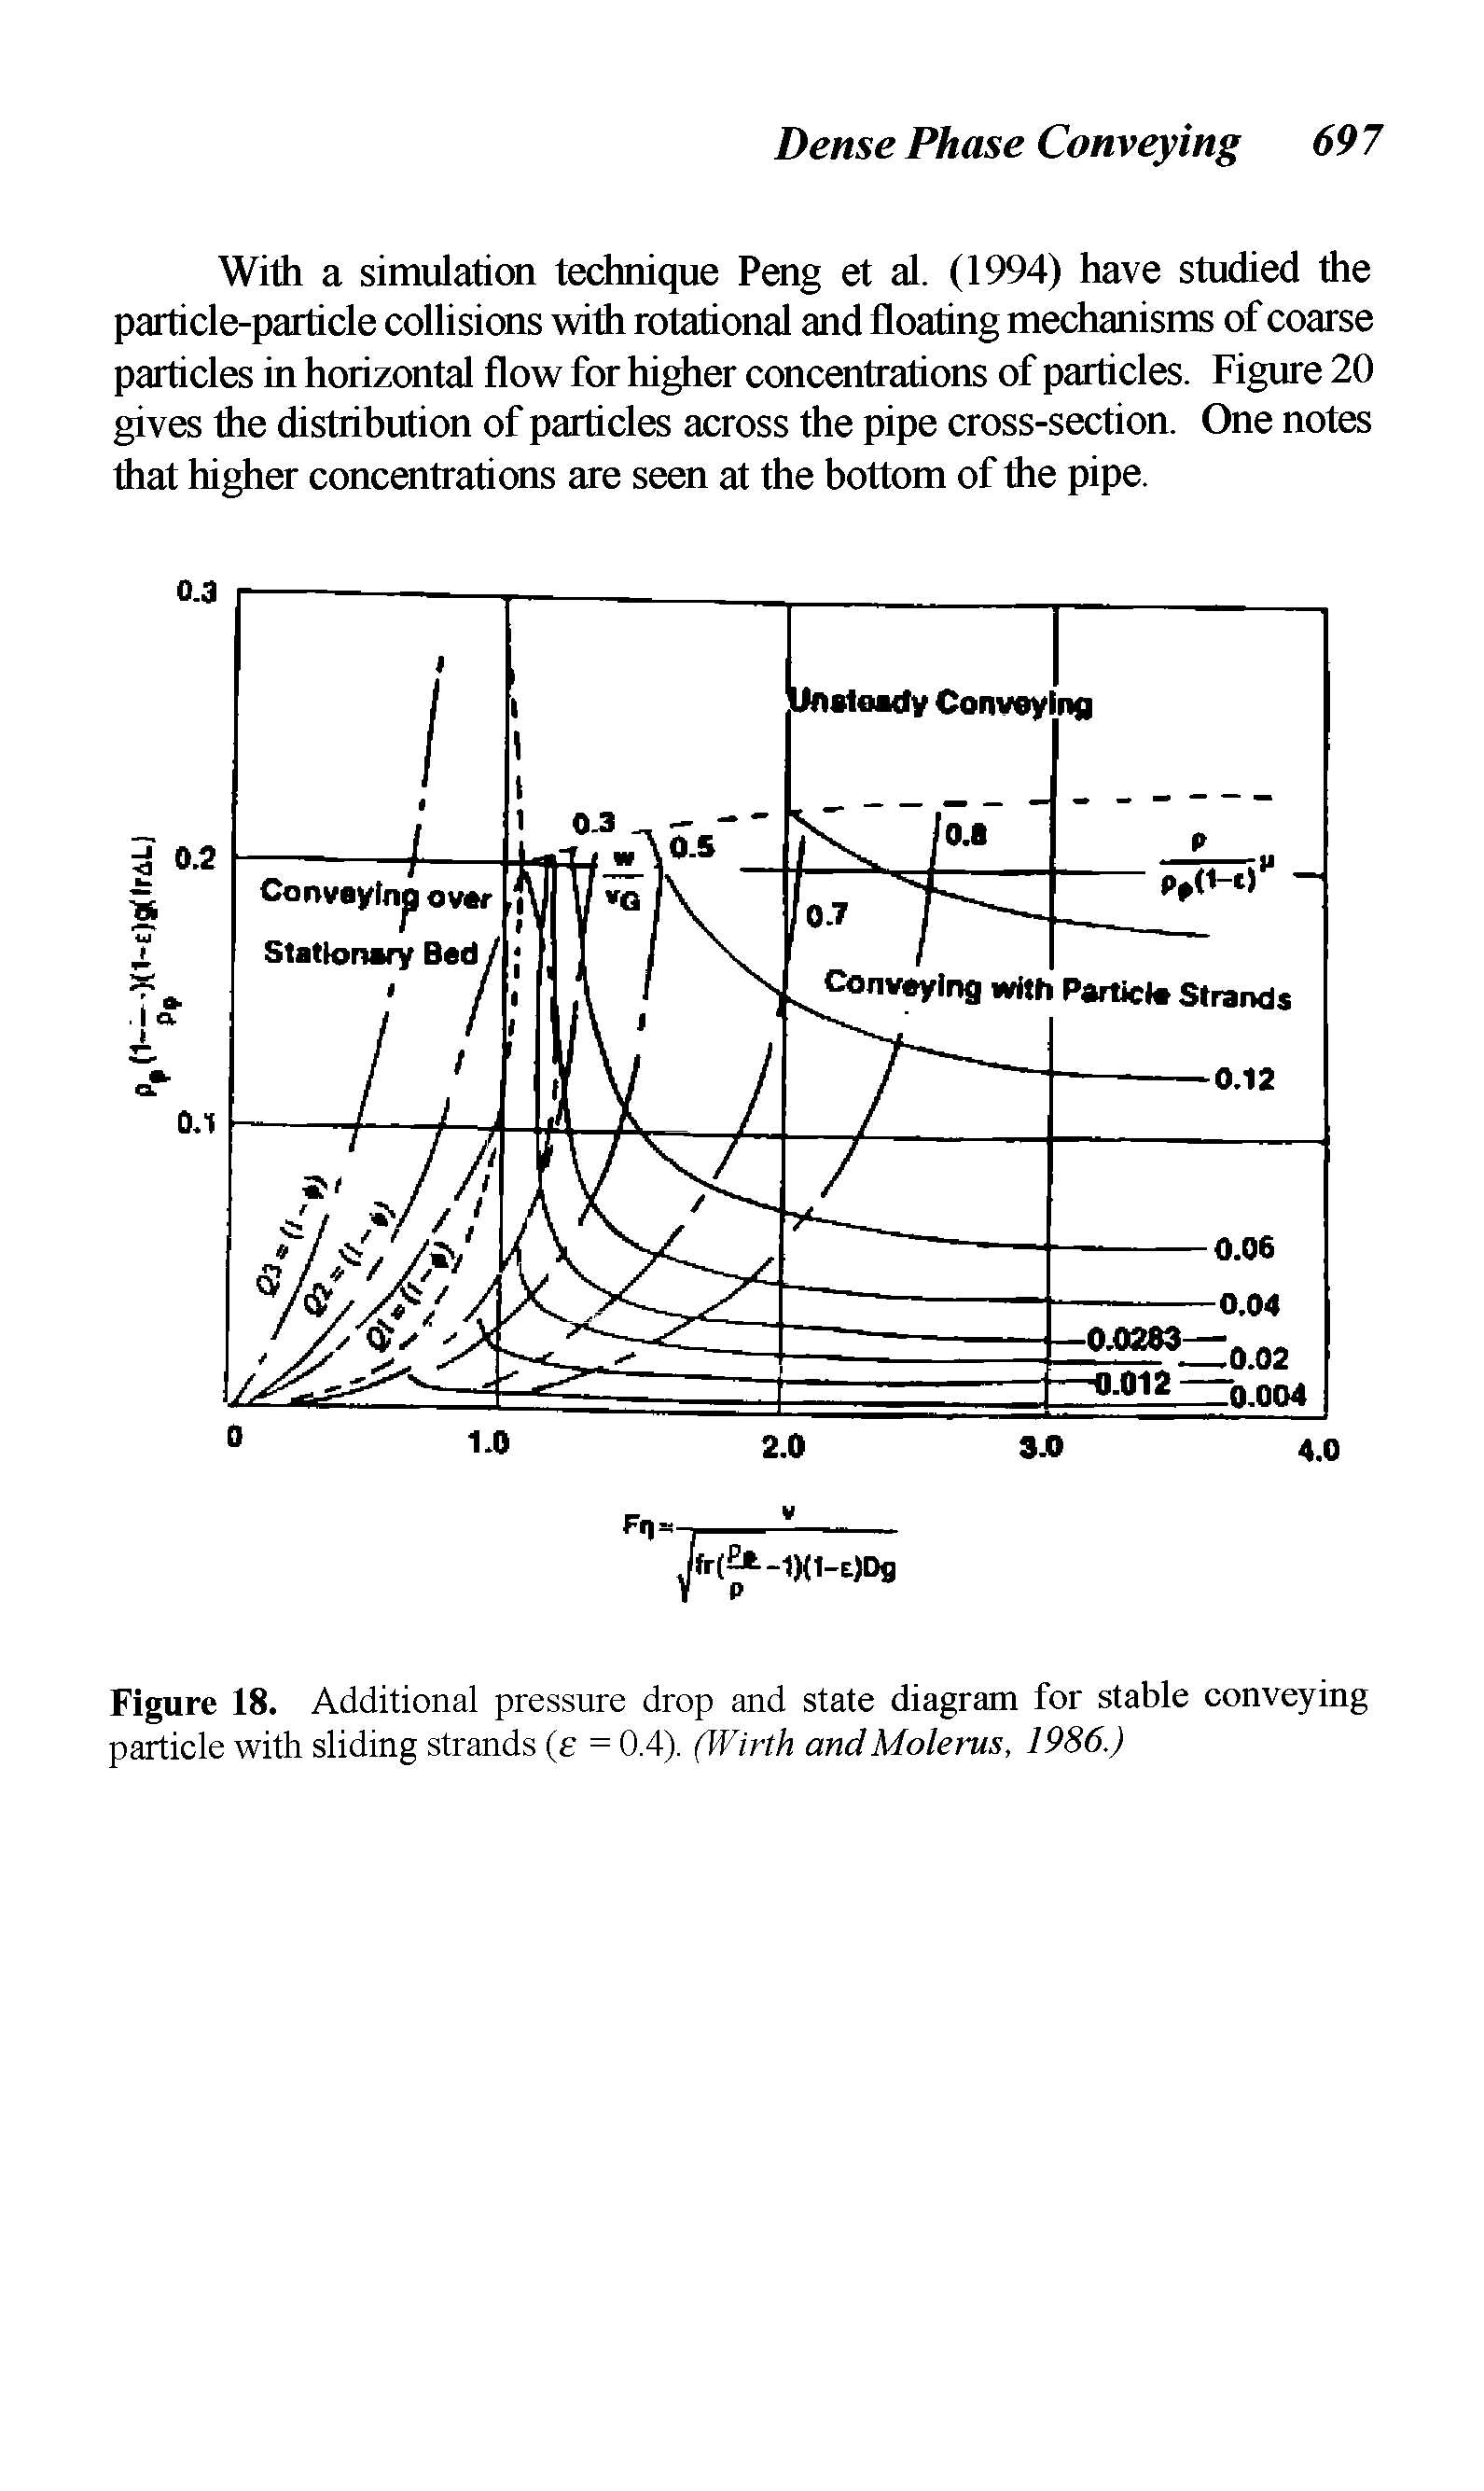 Figure 18. Additional pressure drop and state diagram for stable conveying particle with sliding strands (e = 0.4). (Wirth andMolerus, 1986.)...